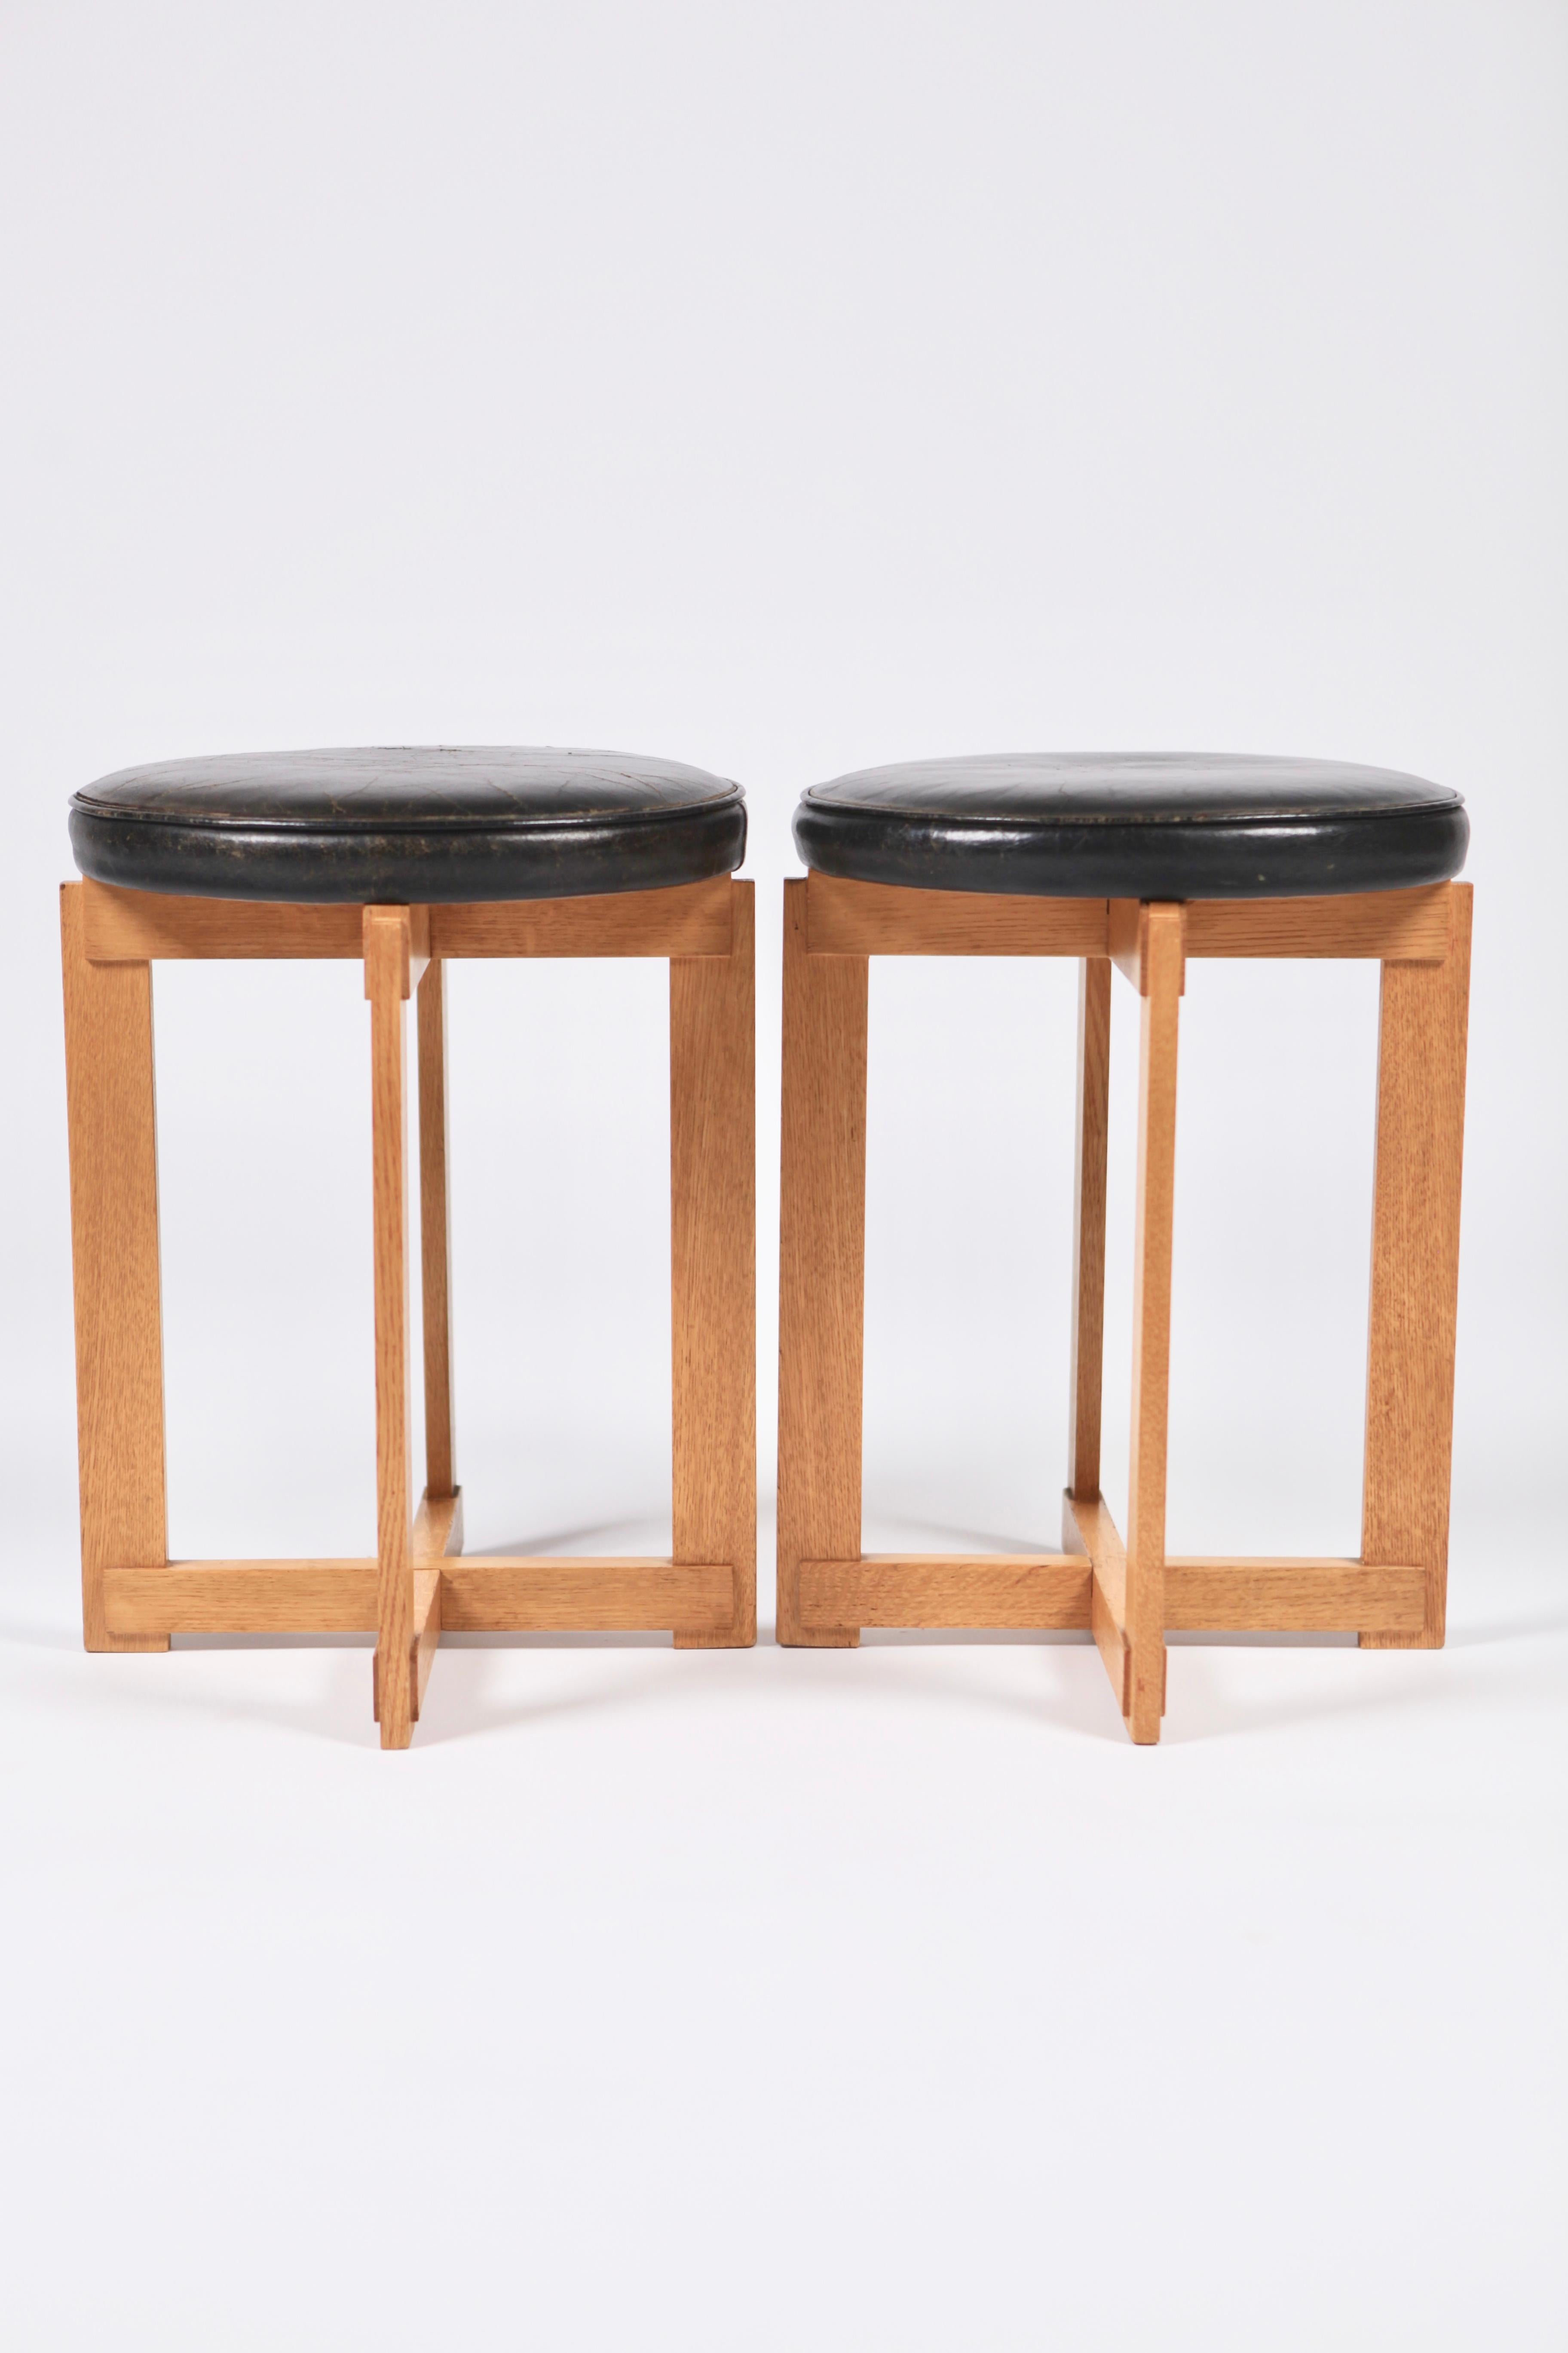 Uno & Östen Kristiansson, Rare Stools in Oak and Leather for Luxus, Sweden 1960s 2